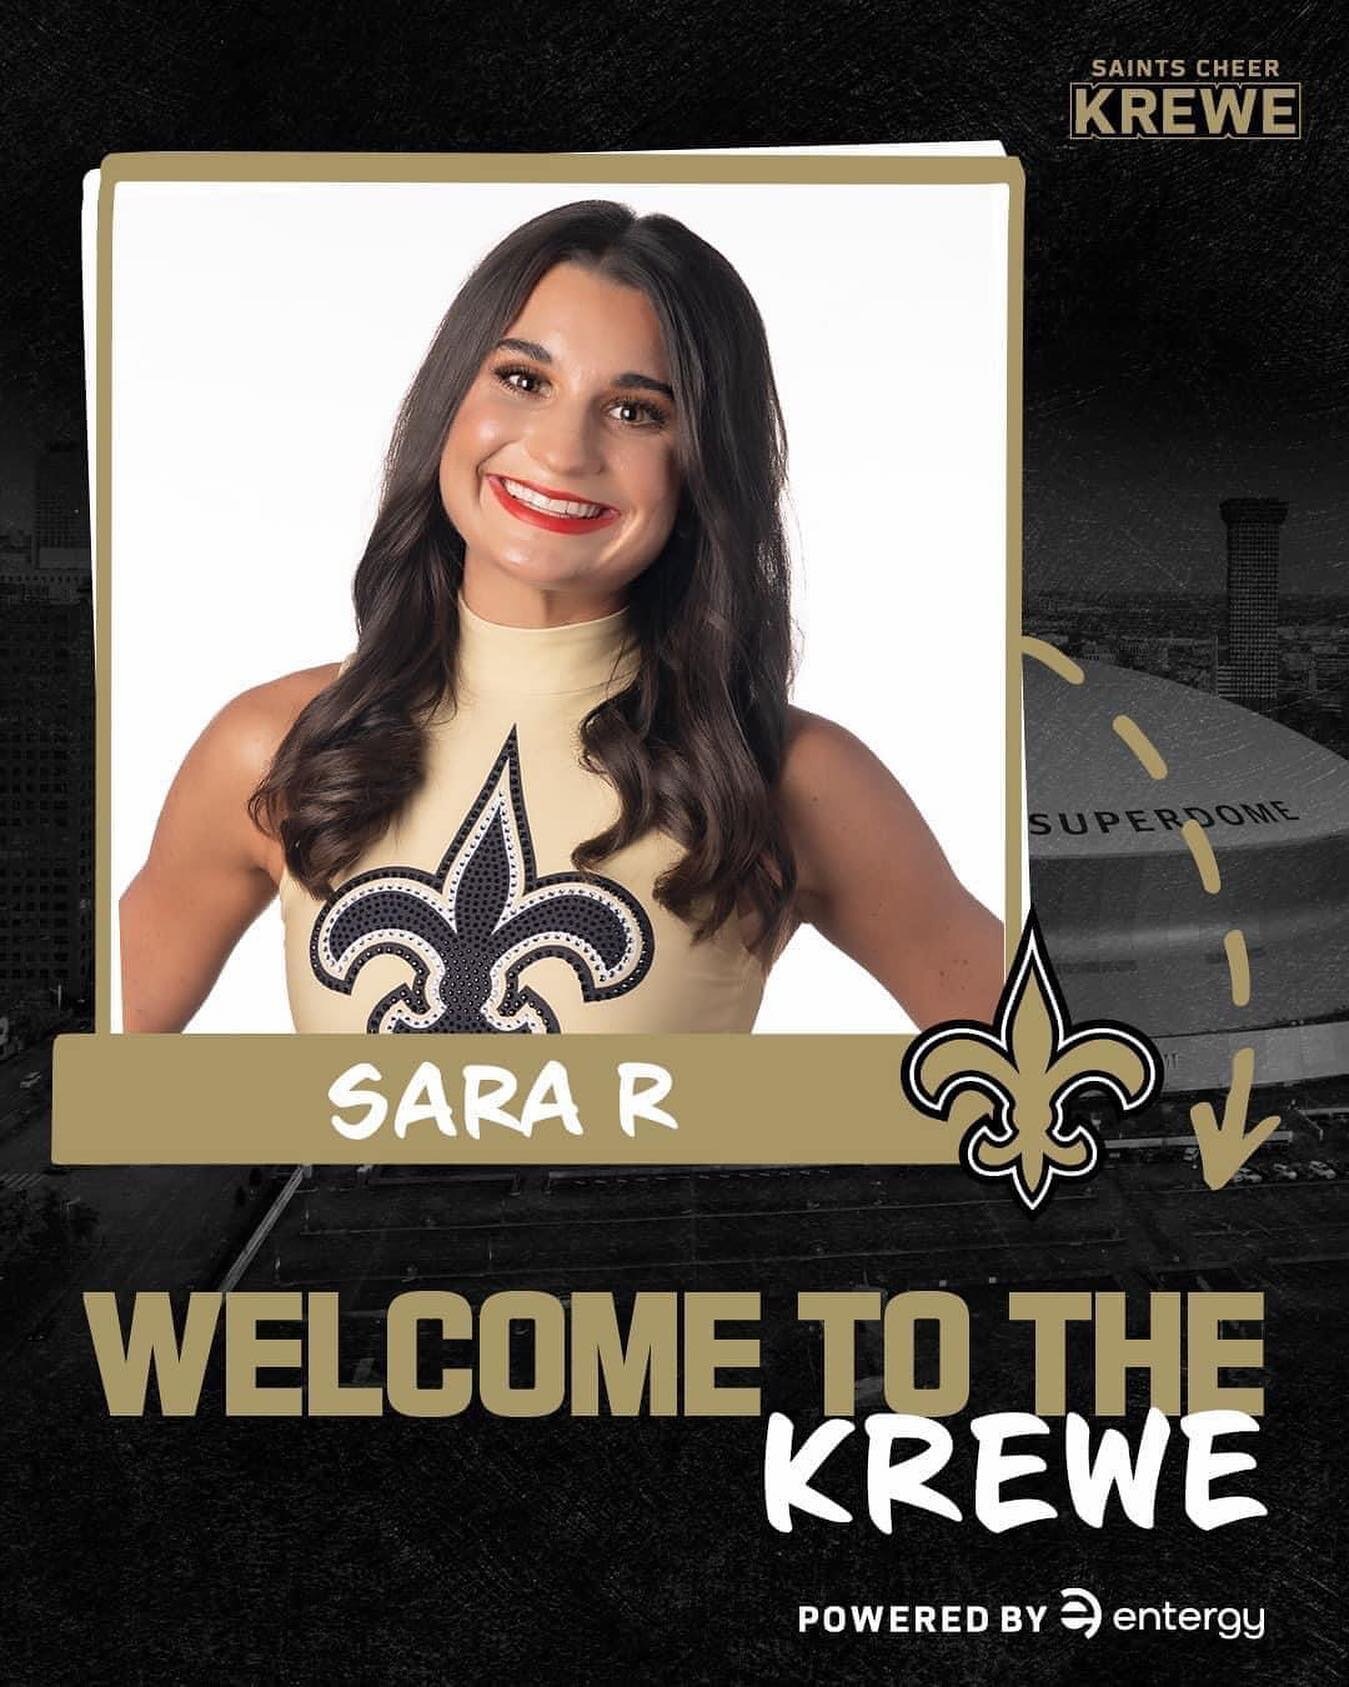 Congratulations to D&amp;G staff member, Sara Reilly, on becoming a part of the Saints Cheer Krewe!!! We are so proud of you!!!